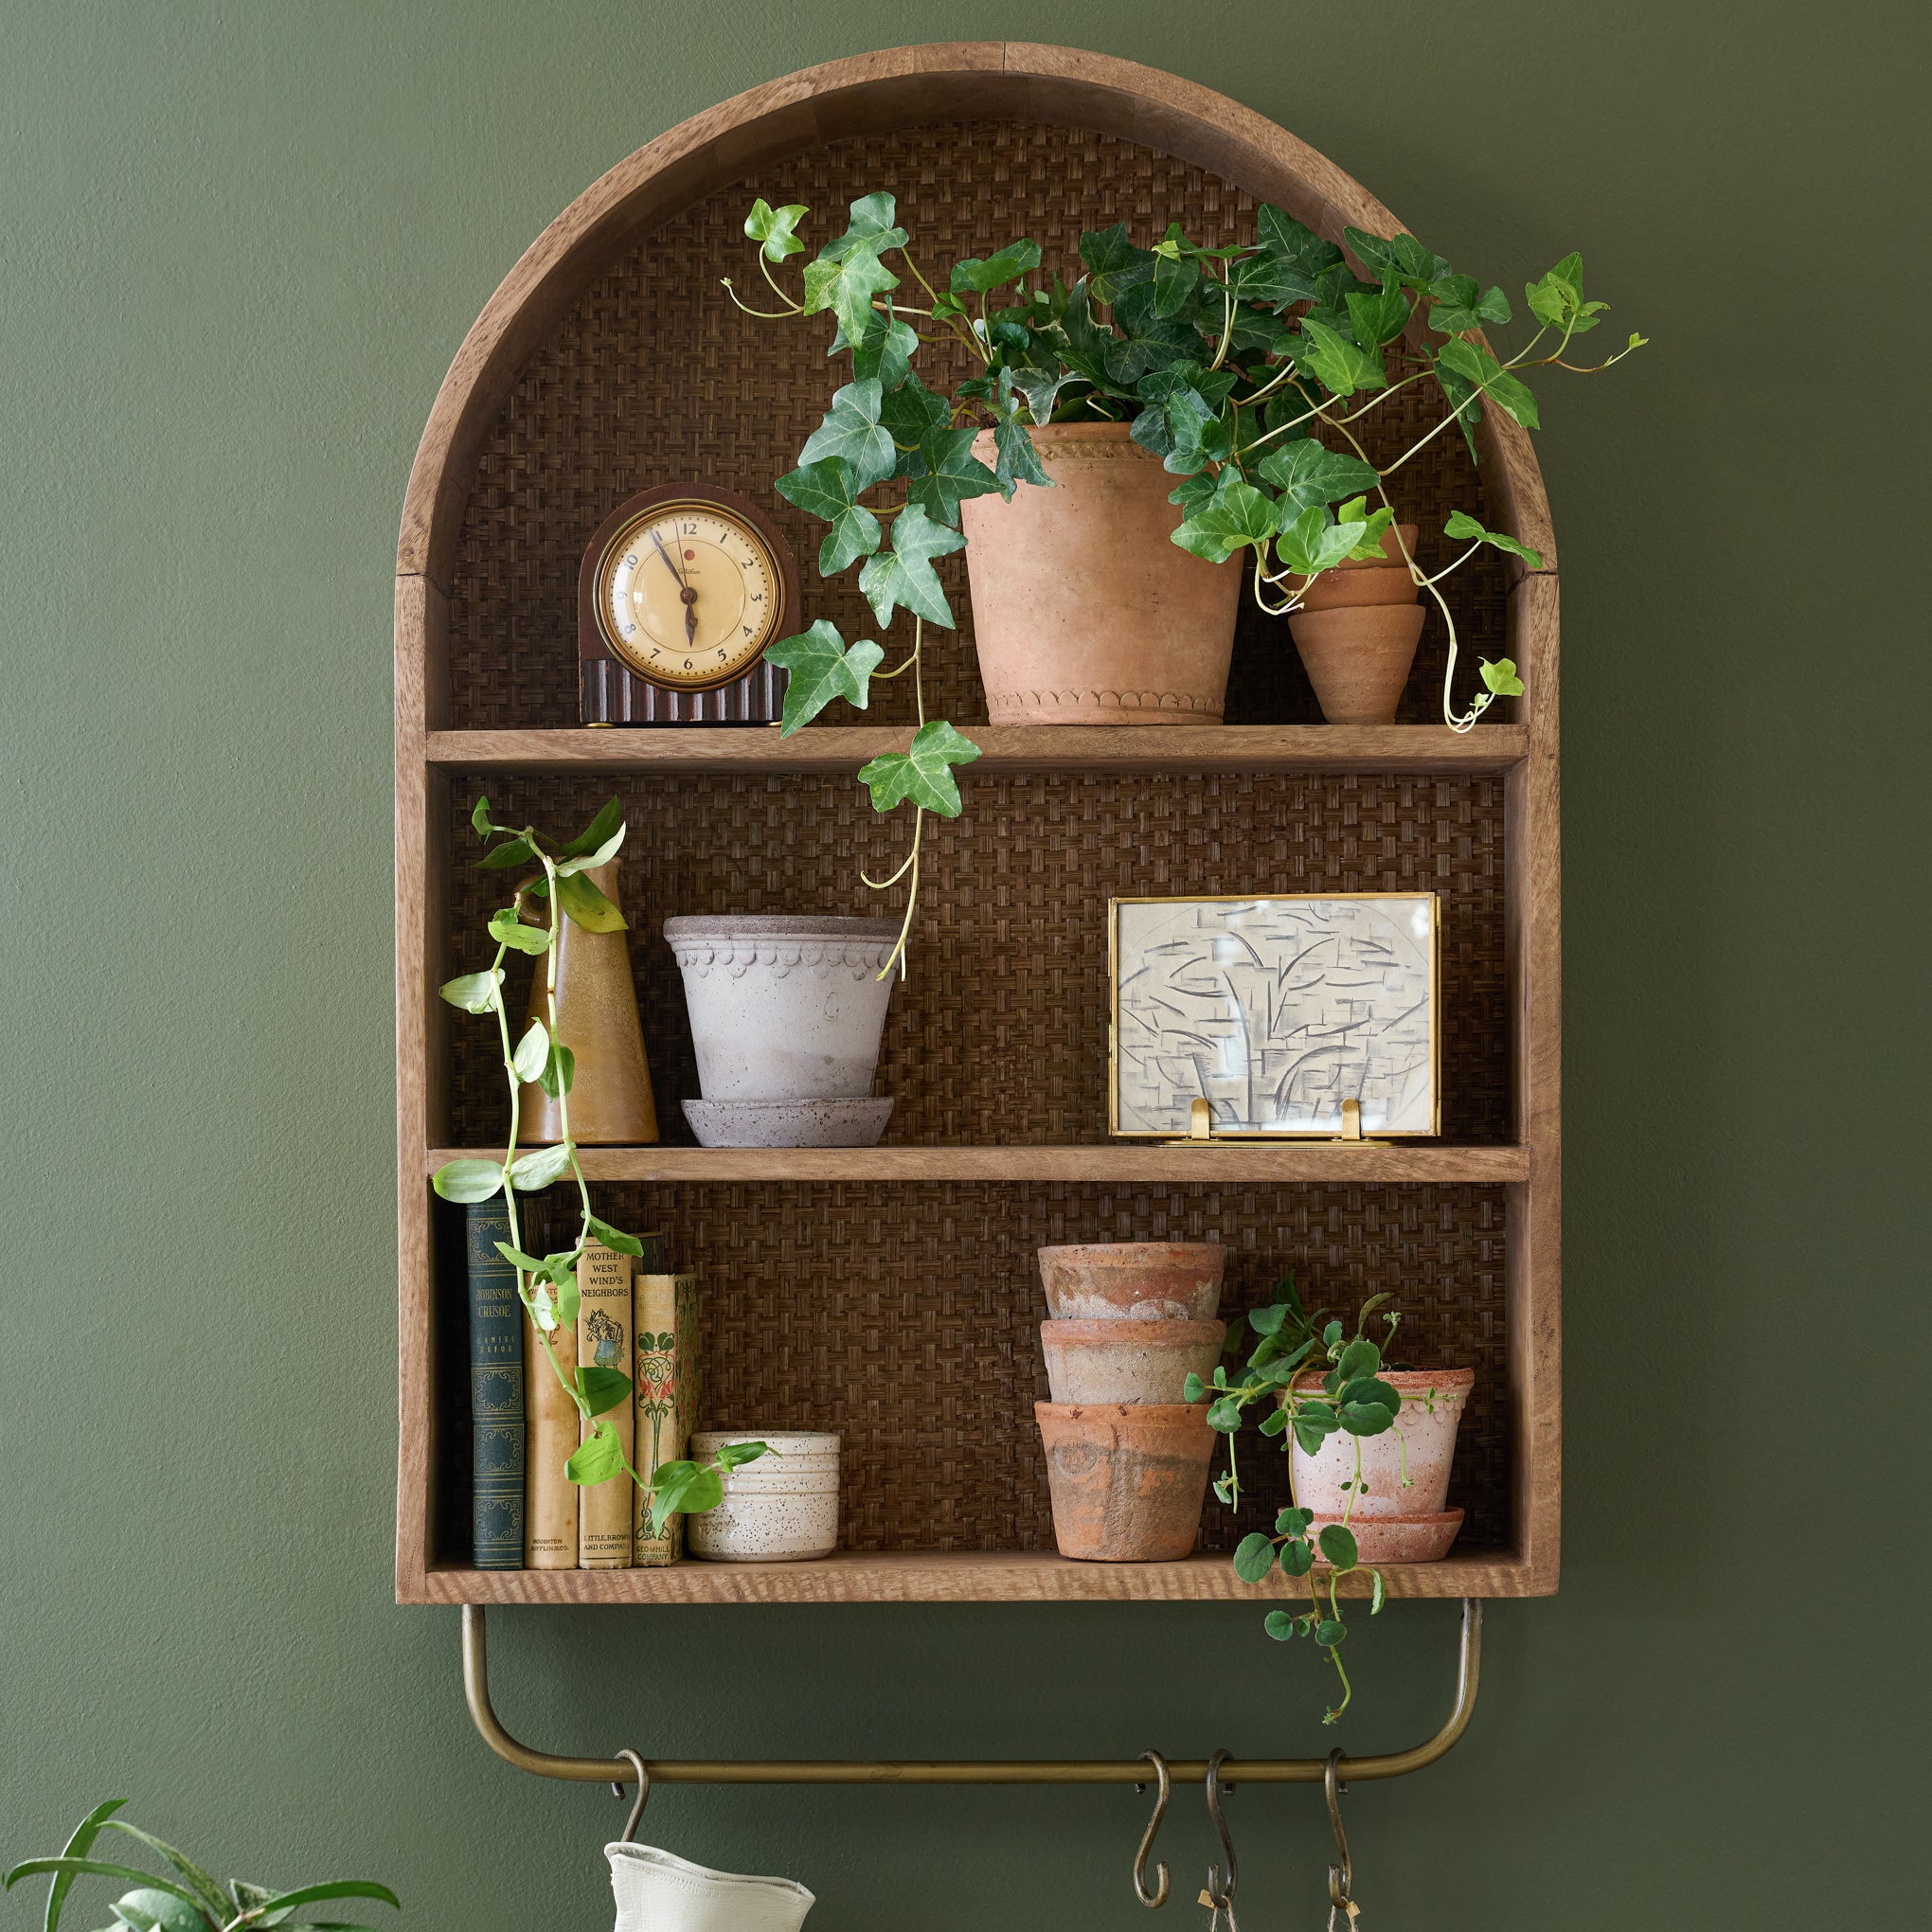 Belmar Arched Woven Wall Shelf with plants and pots and a clock on shelves$288.00